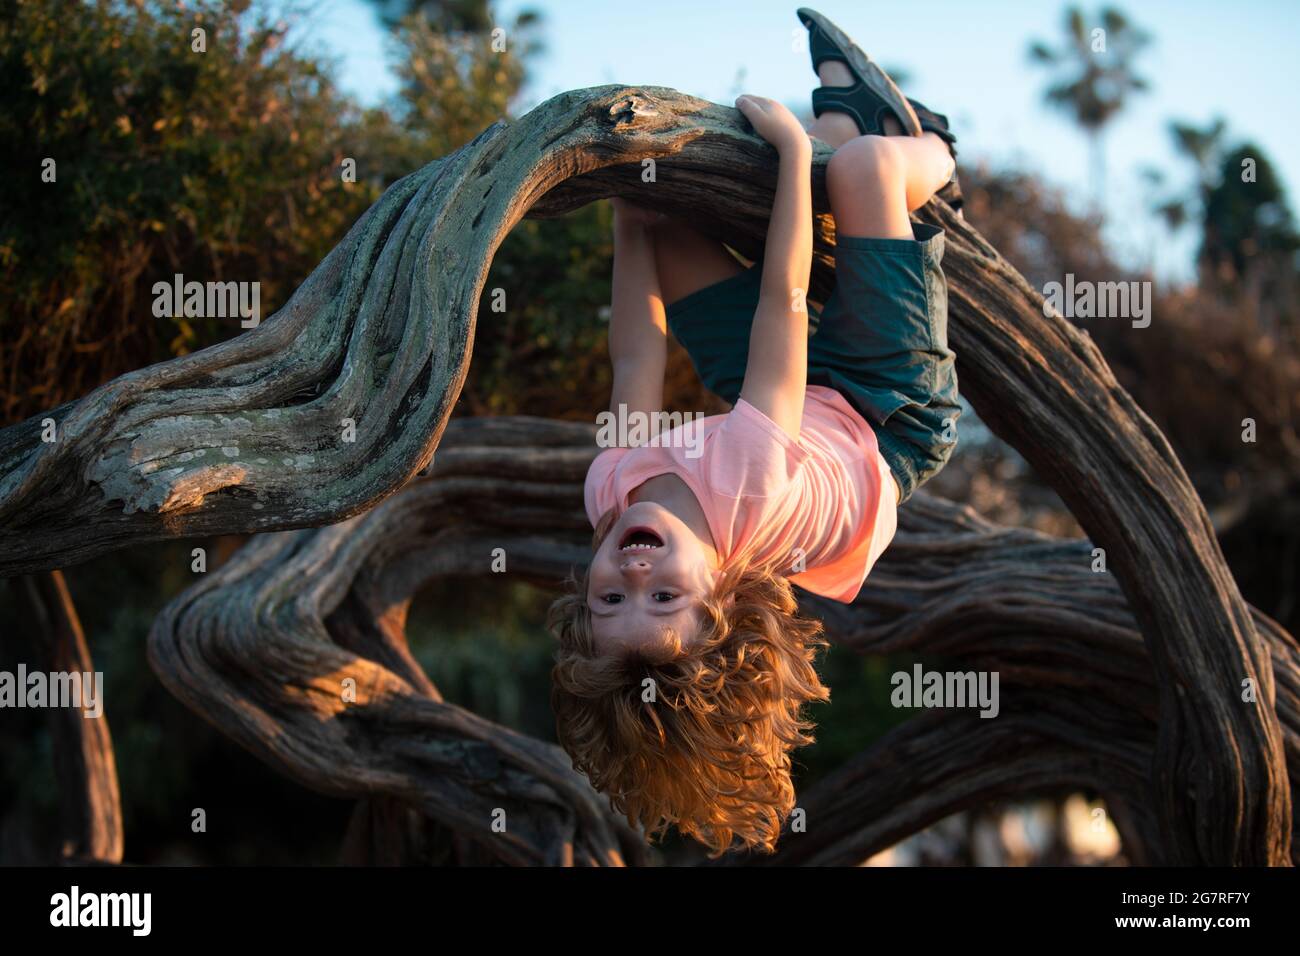 Child boy in park, climb on a tree rope Stock Photo